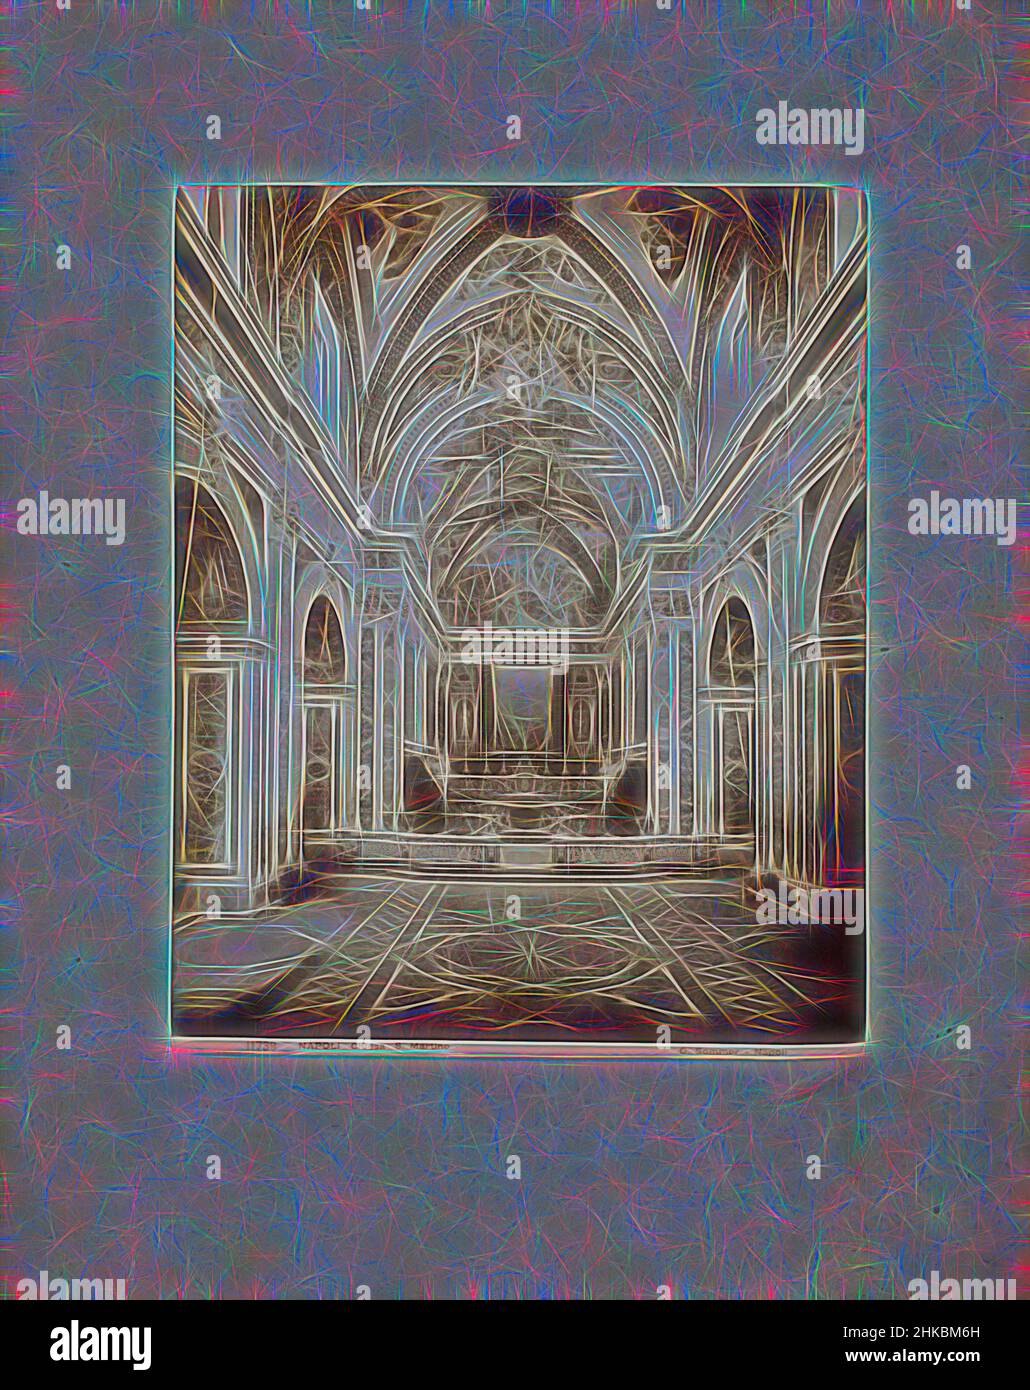 Inspired by Interior of the Carthusian Monastery of St. Martin in Naples, Italy, Chiesa S. Martino, Napoli, Giorgio Sommer, Naples, 1857 - 1914, paper, albumen print, height 413 mm × width 318 mm, Reimagined by Artotop. Classic art reinvented with a modern twist. Design of warm cheerful glowing of brightness and light ray radiance. Photography inspired by surrealism and futurism, embracing dynamic energy of modern technology, movement, speed and revolutionize culture Stock Photo